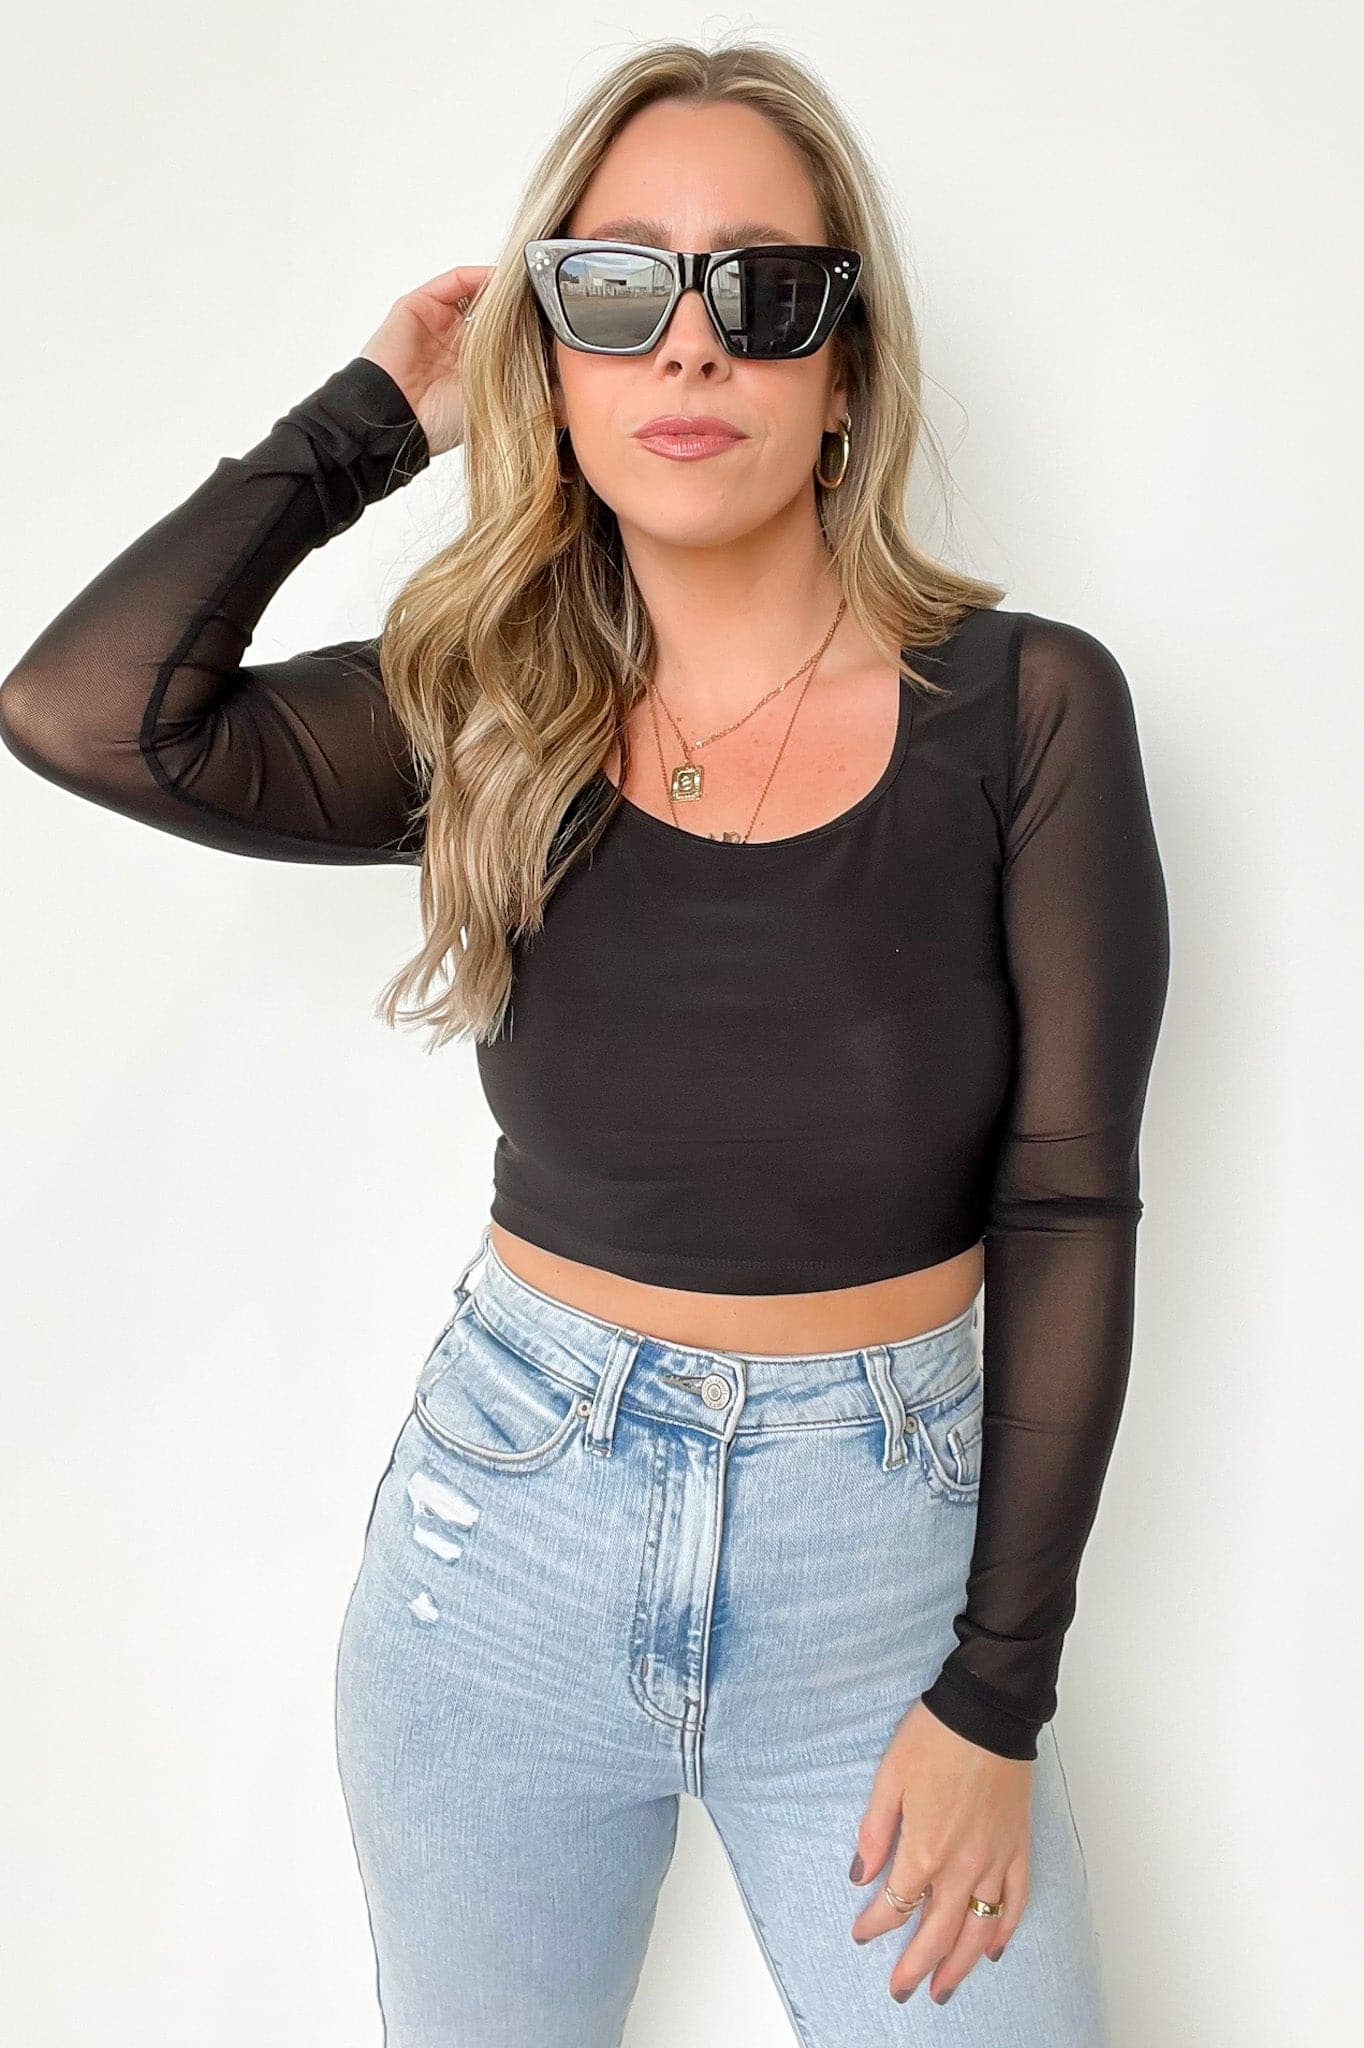  Evenings in Love Mesh Sleeve Cropped Top - FINAL SALE - Madison and Mallory